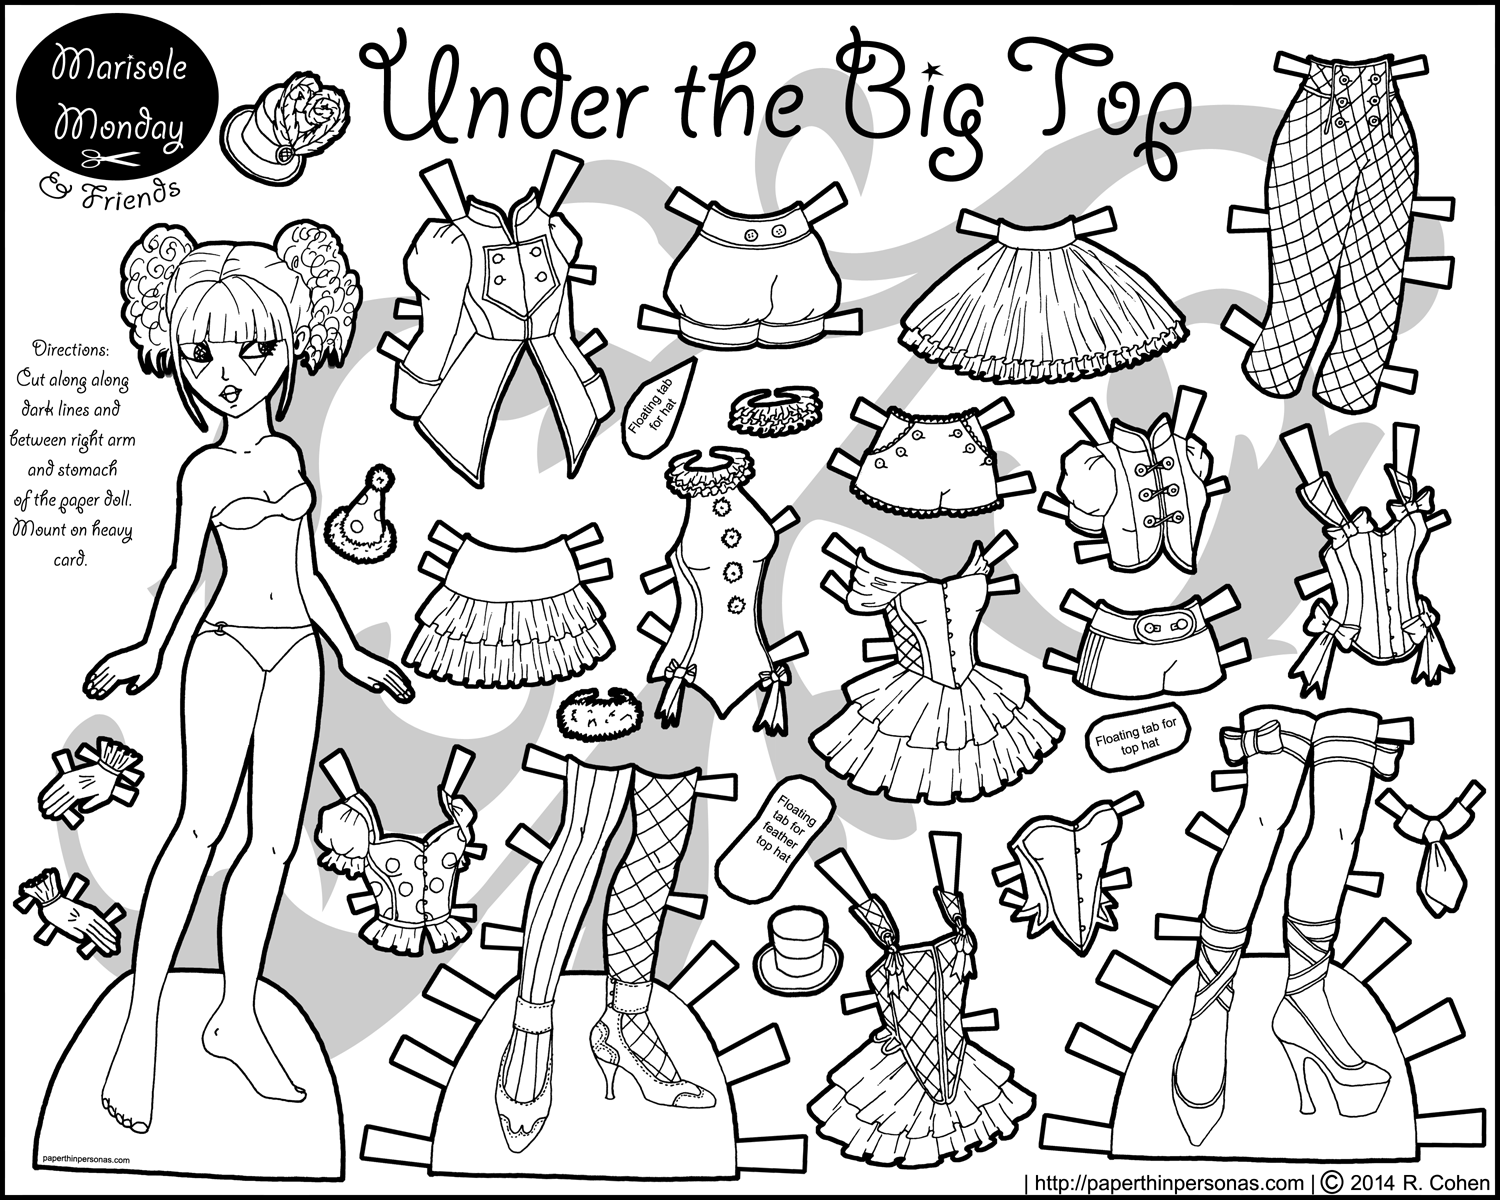 Circus Paper Doll for Coloring • Paper Thin Personas